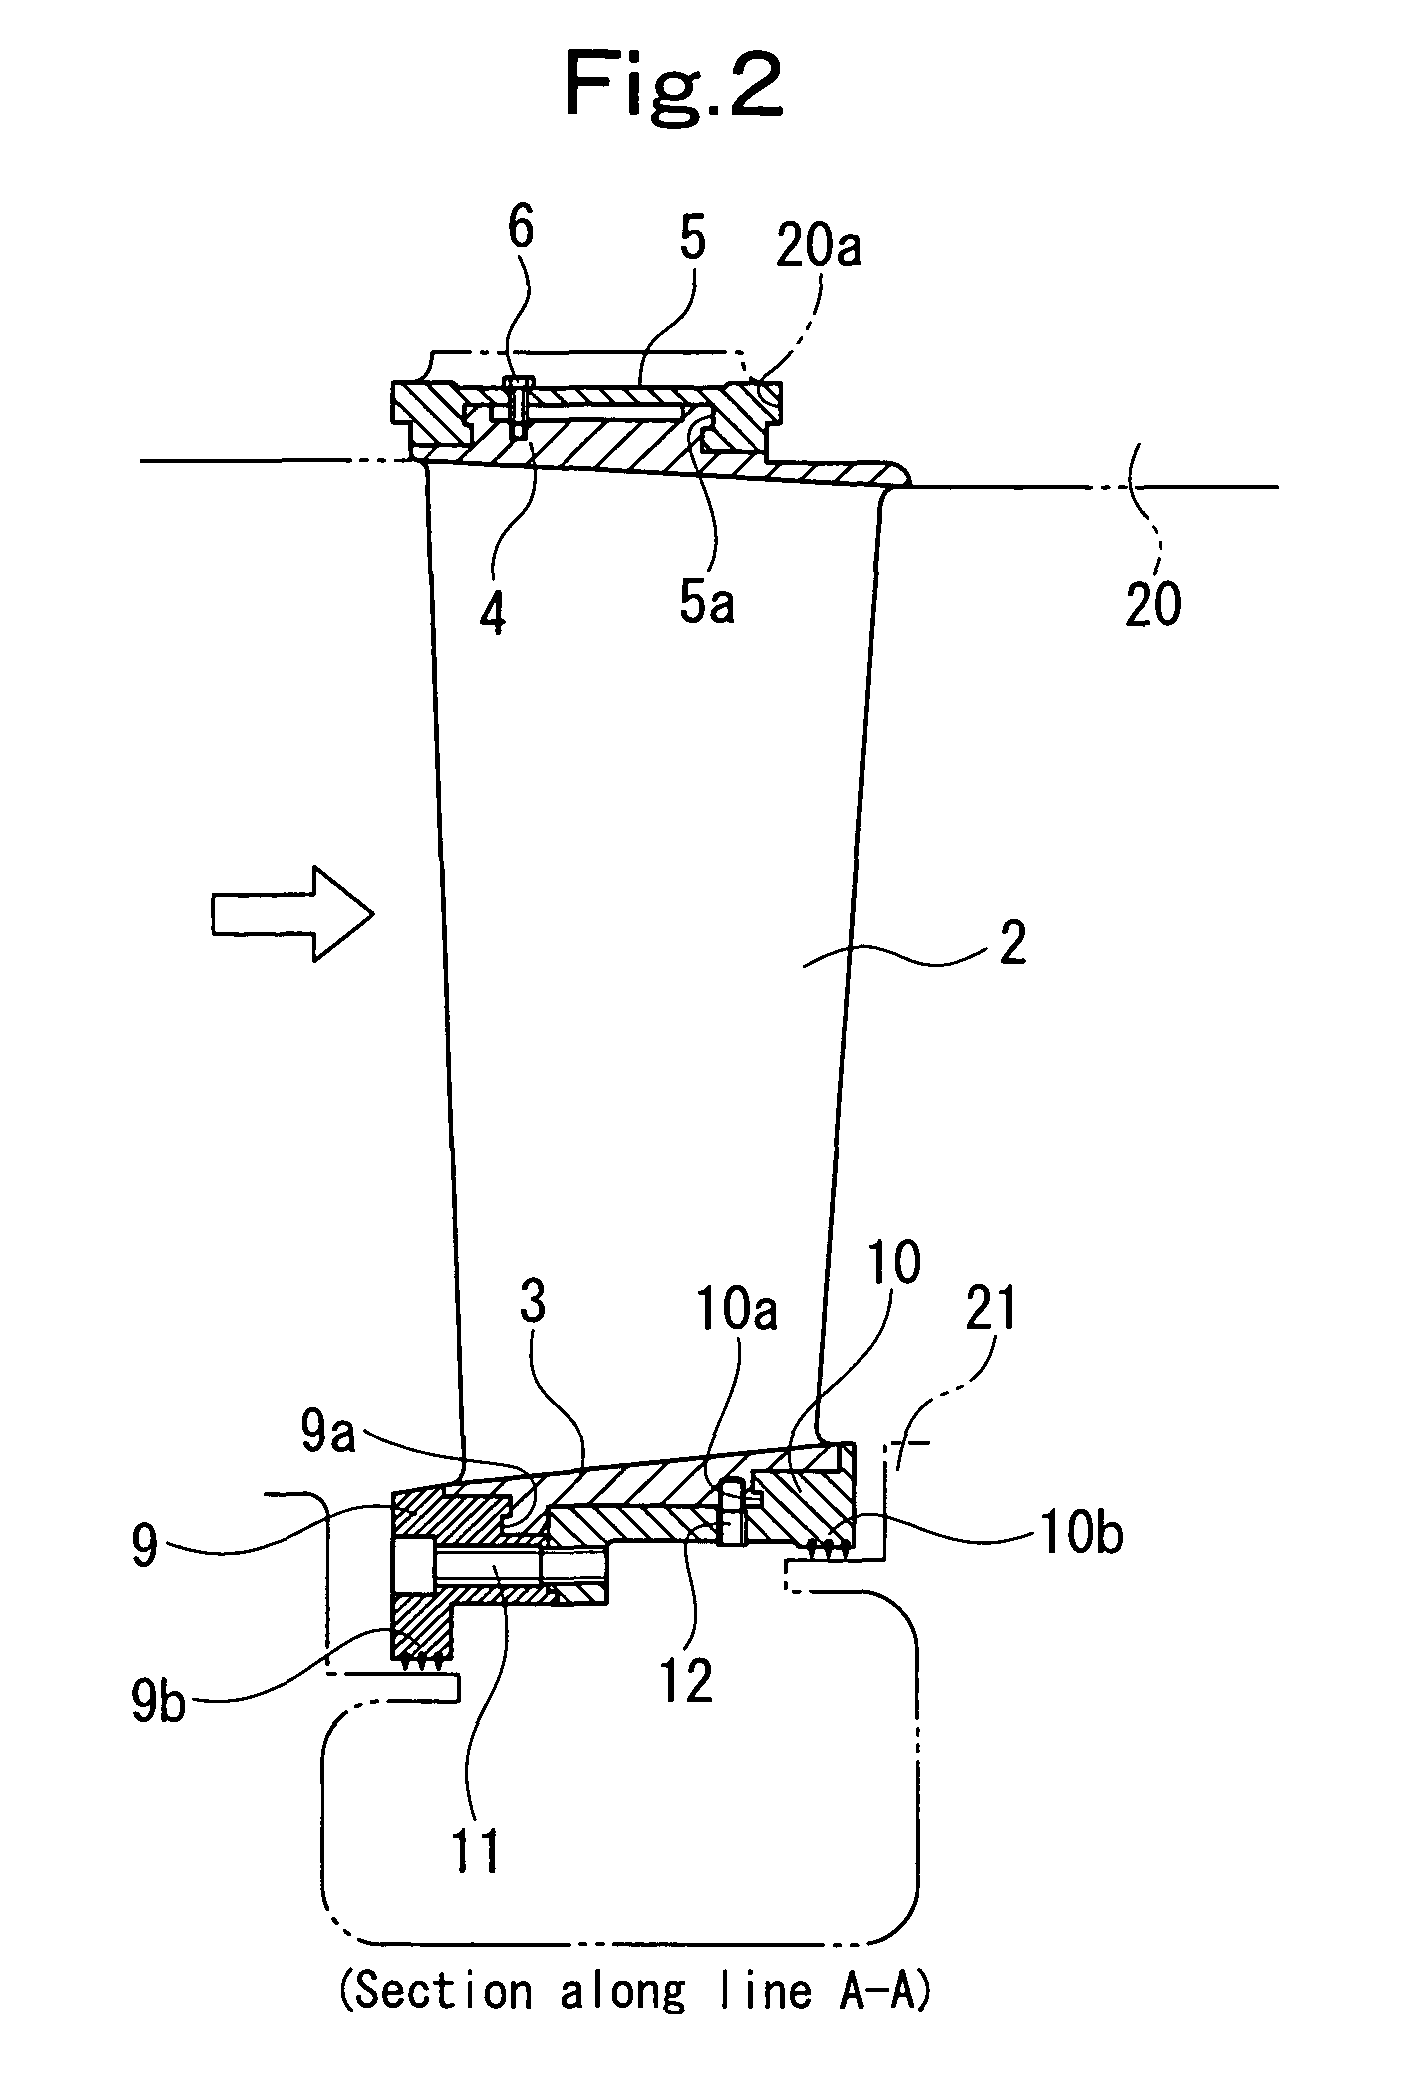 Stationary blade ring of axial compressor